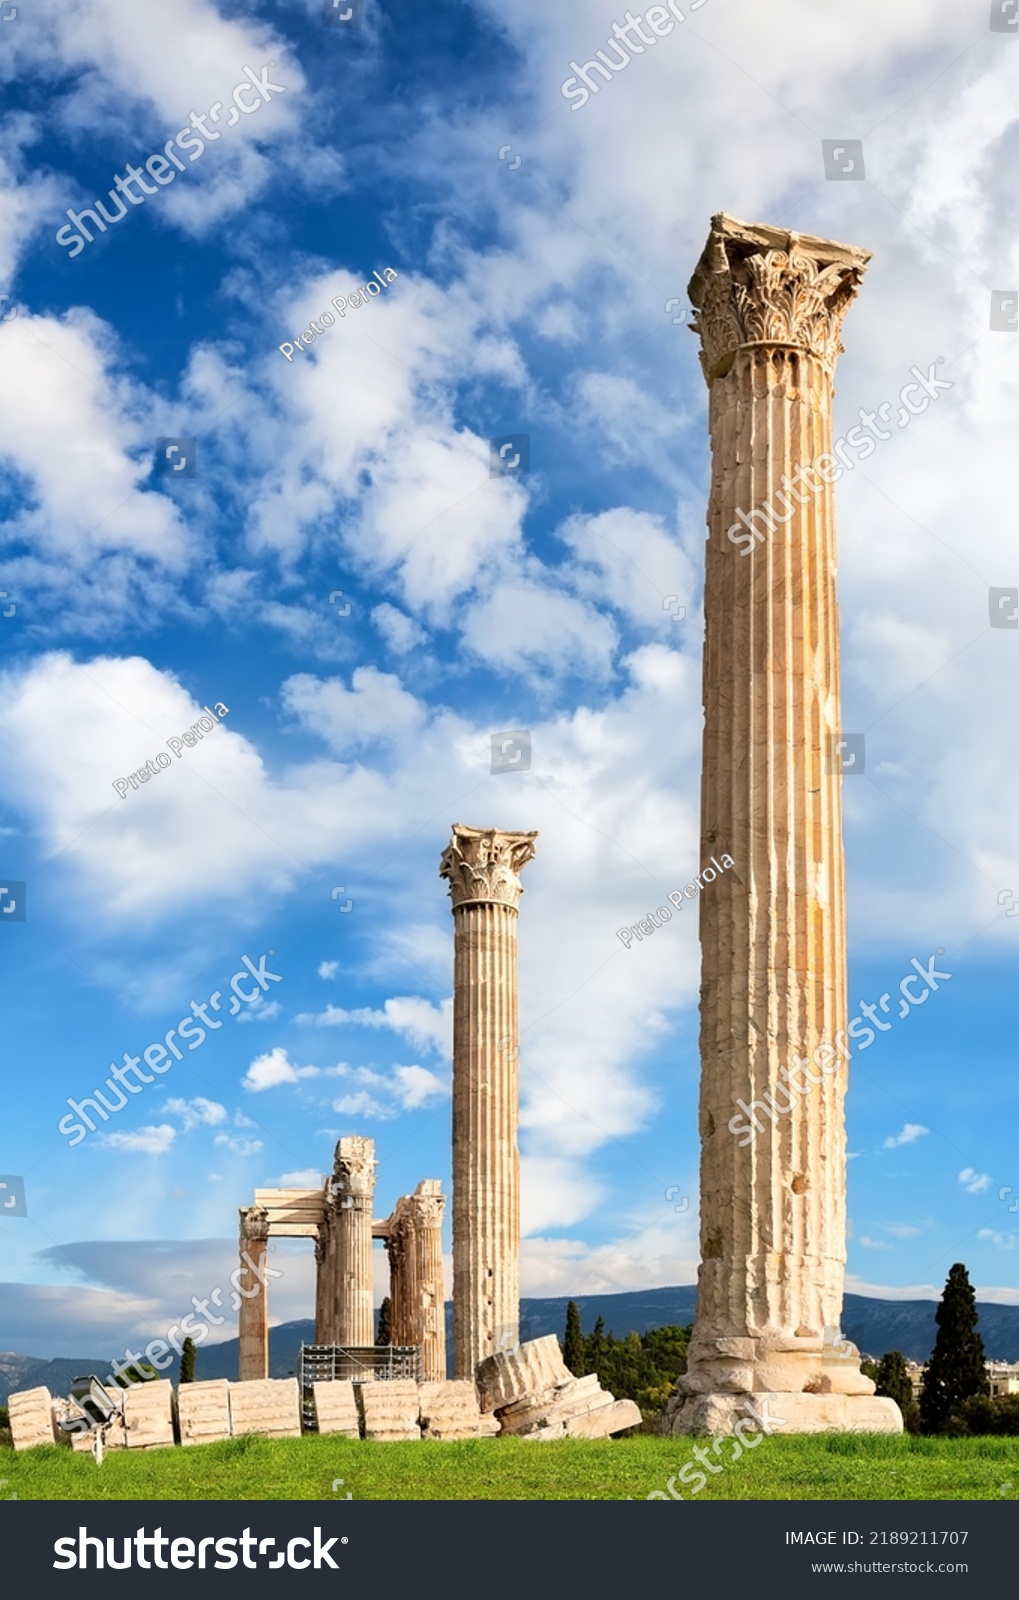 The Temple of Olympian Zeus or Columns of the Olympian Zeus, is a monument of Greece and a former colossal temple at the center of the Greek capital Athens, Greece. #2189211707